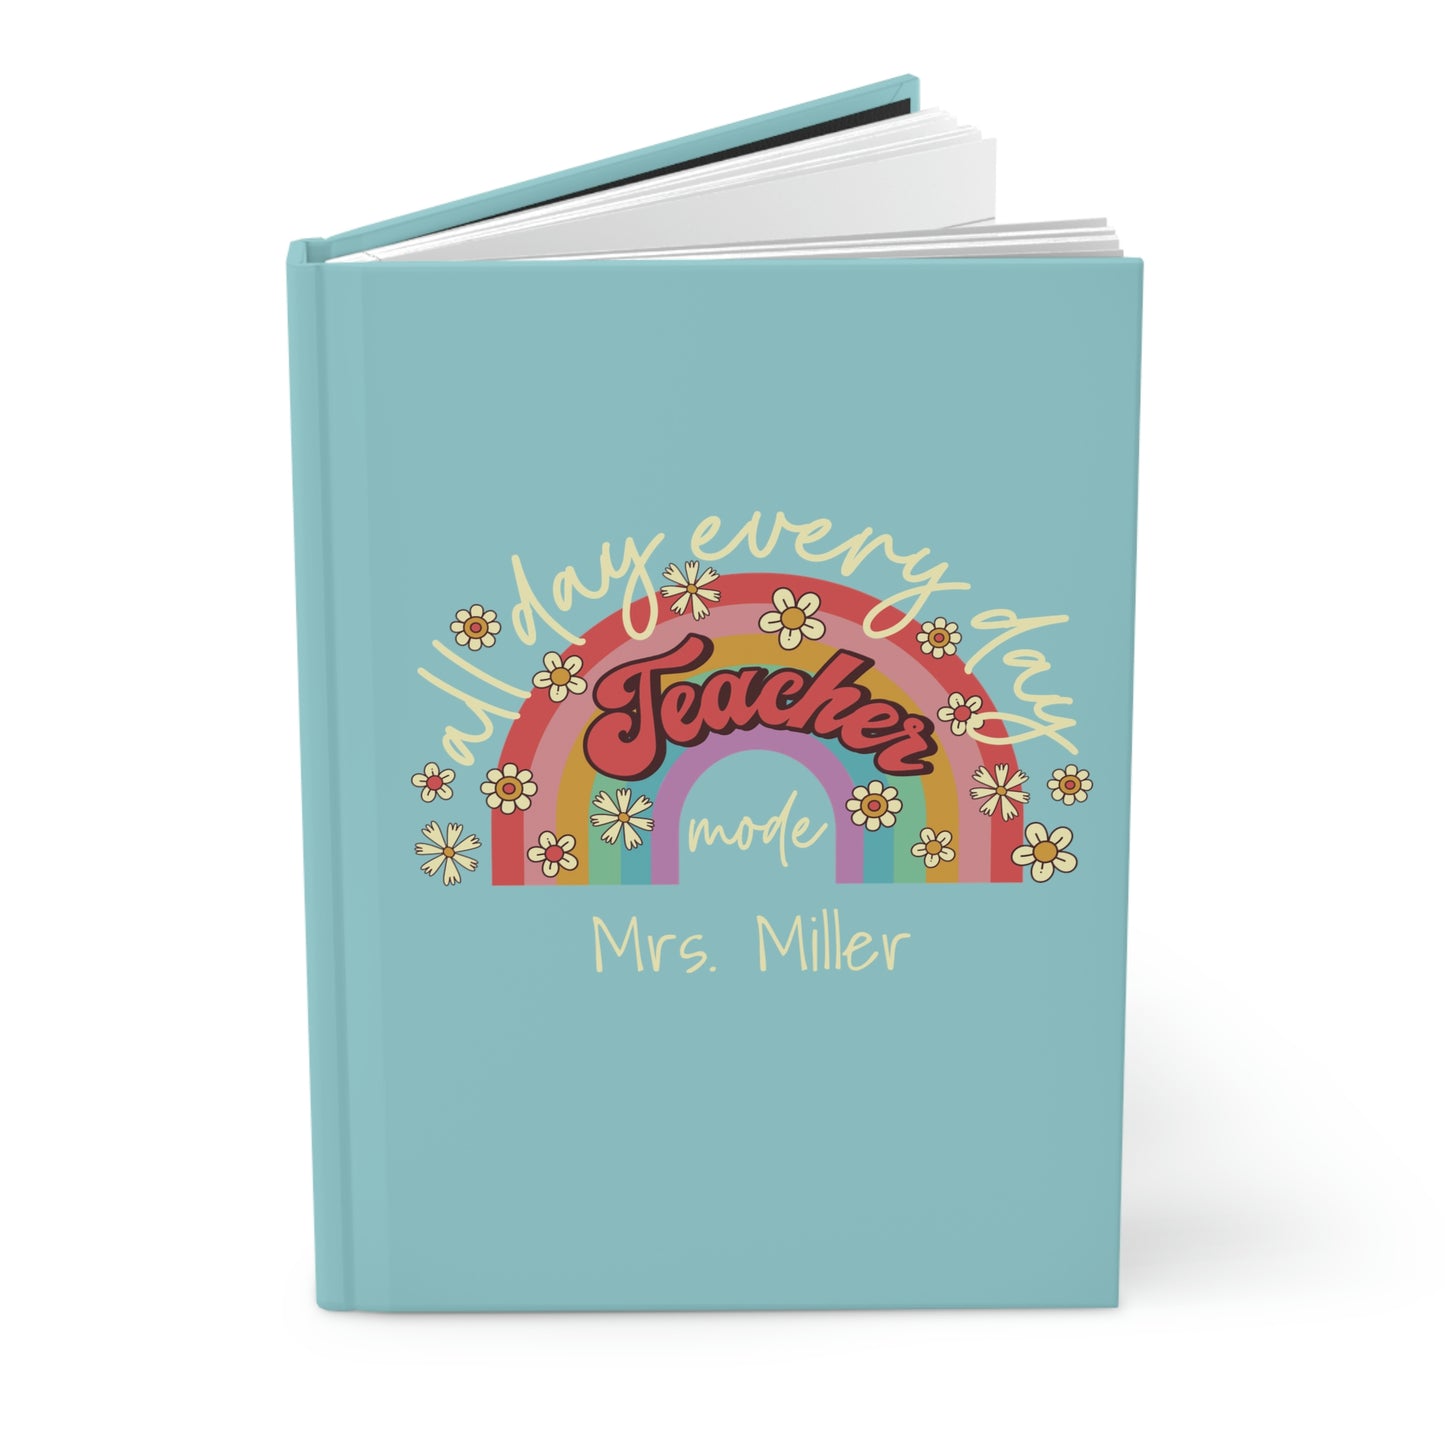 Personalized Teacher Book - All Day Every Day Teacher Mode